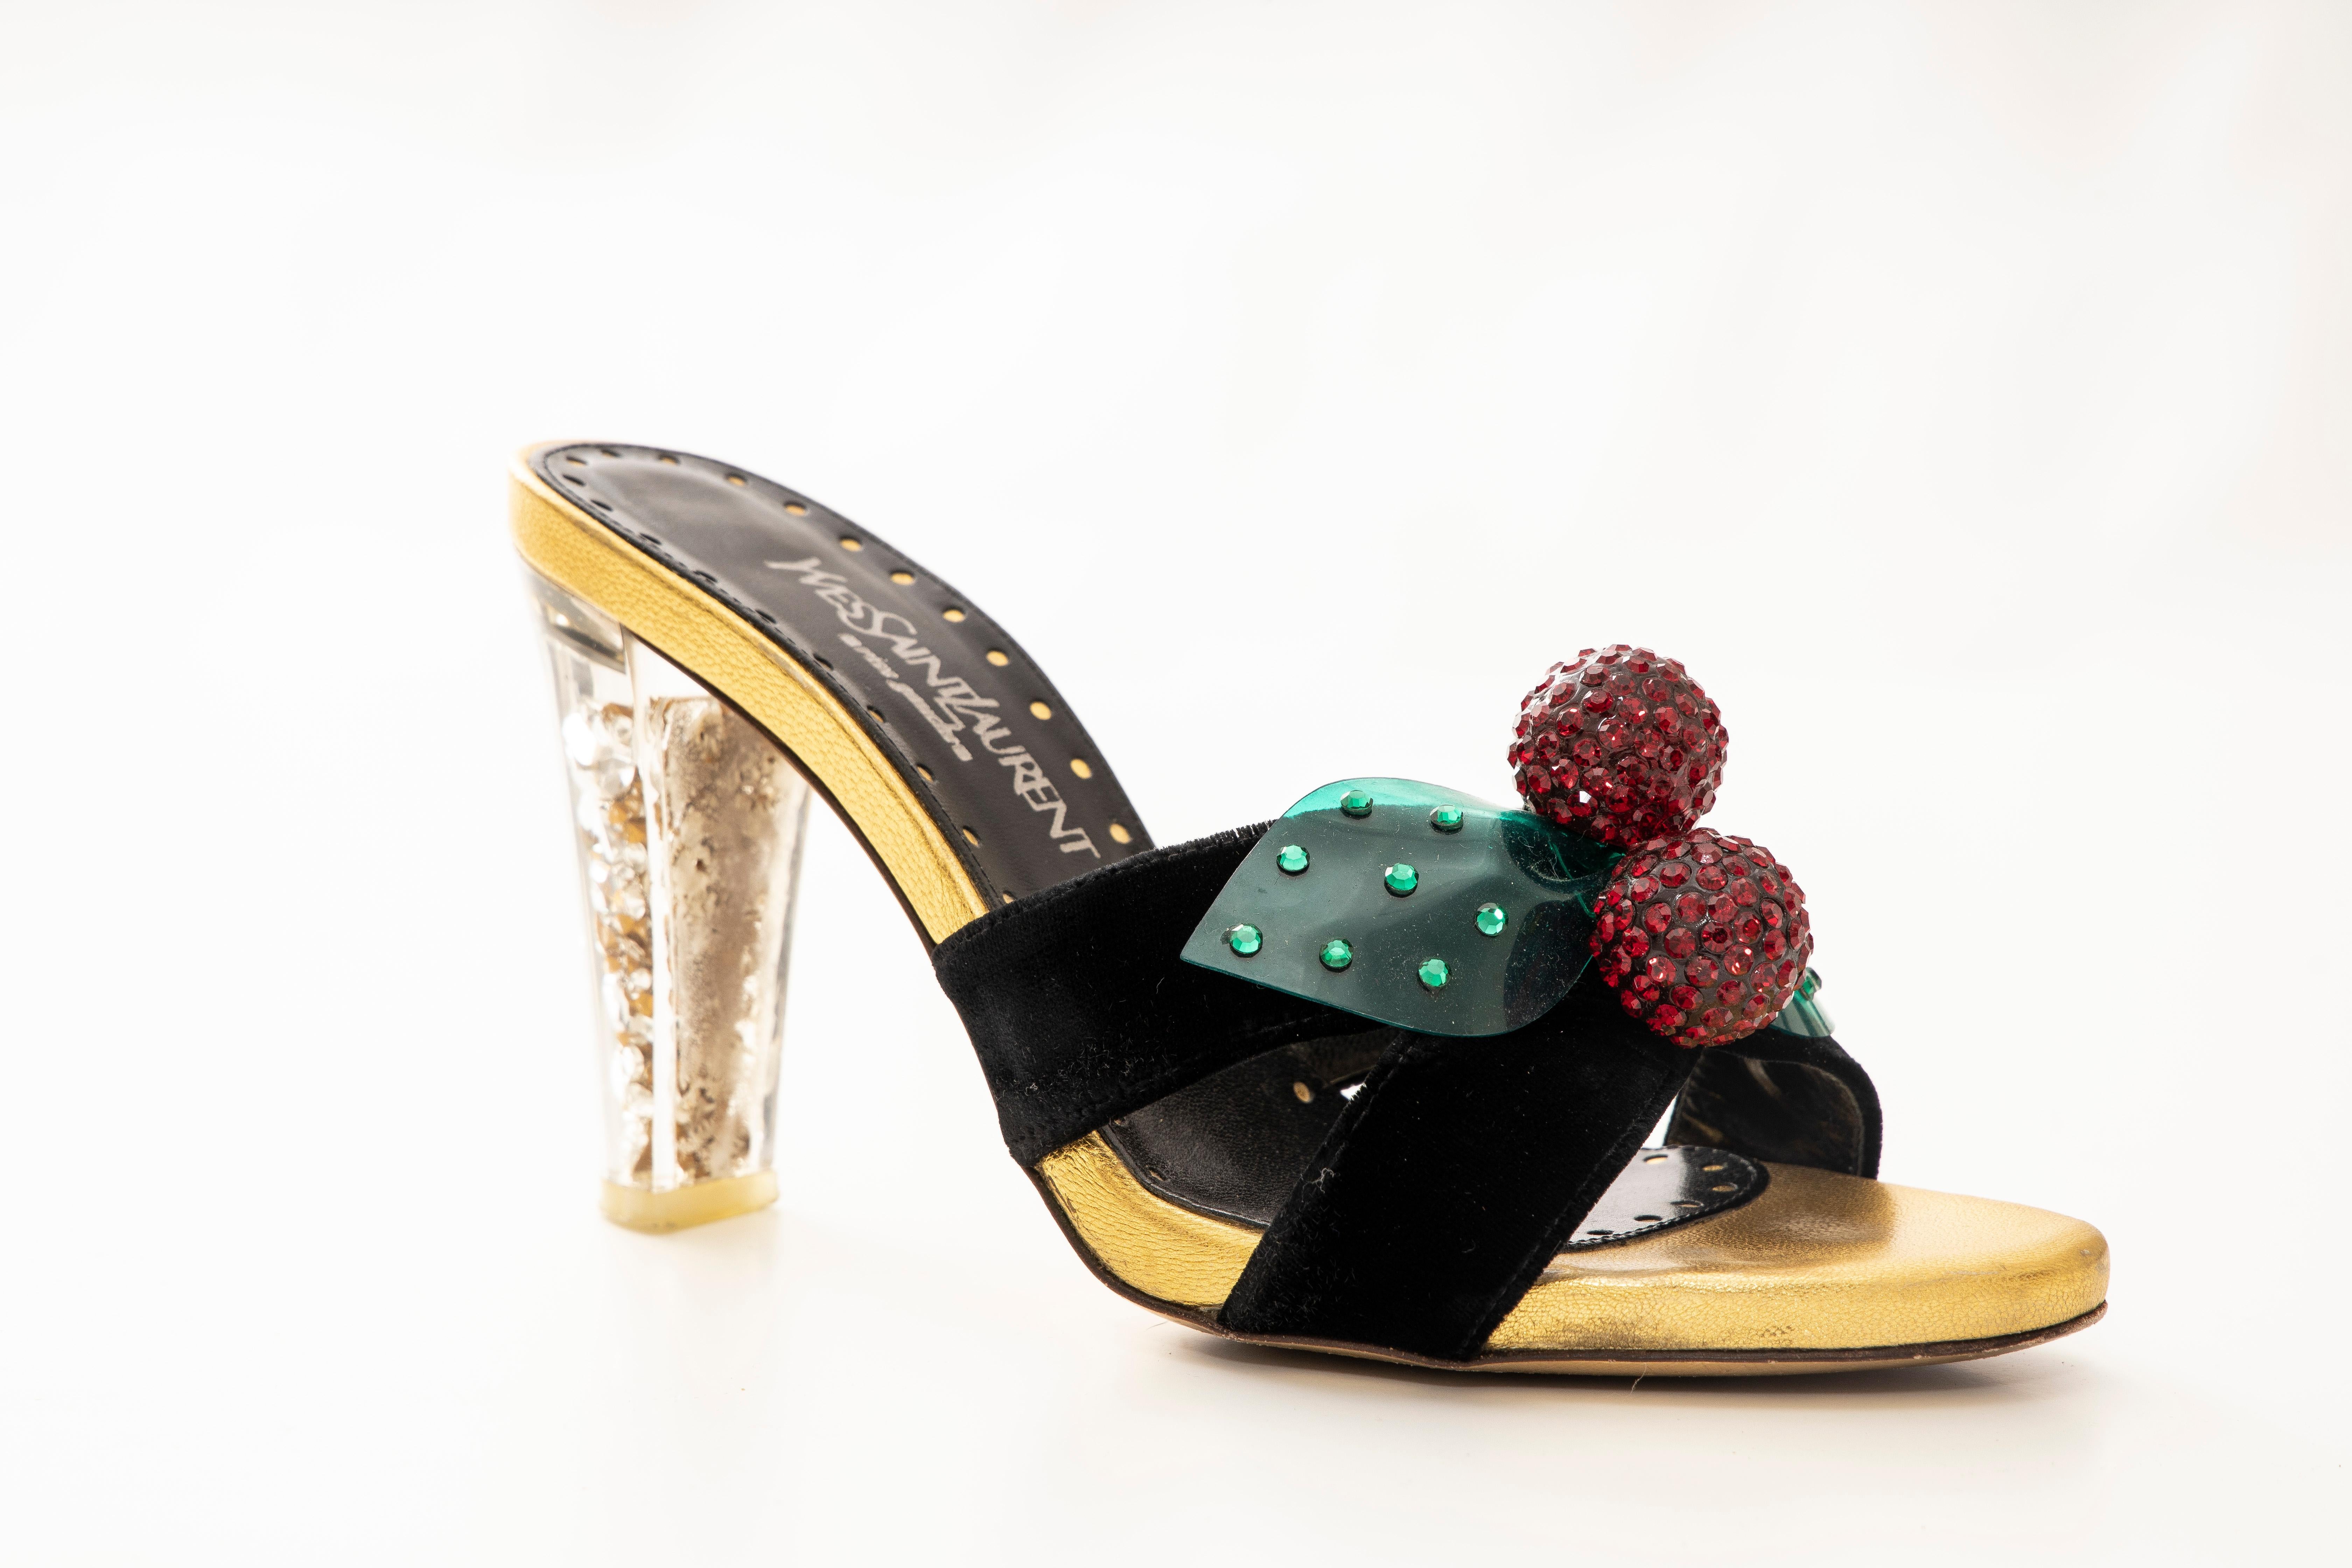 Tom Ford for Yves Saint Laurent Runway Fall 2003 black velvet sandals with crossover accents and detachable embellished cherry accents at vamps featuring jewel embedded lucite heels. 
Includes box.

IT. 37, US. 7
Heels: 3.5